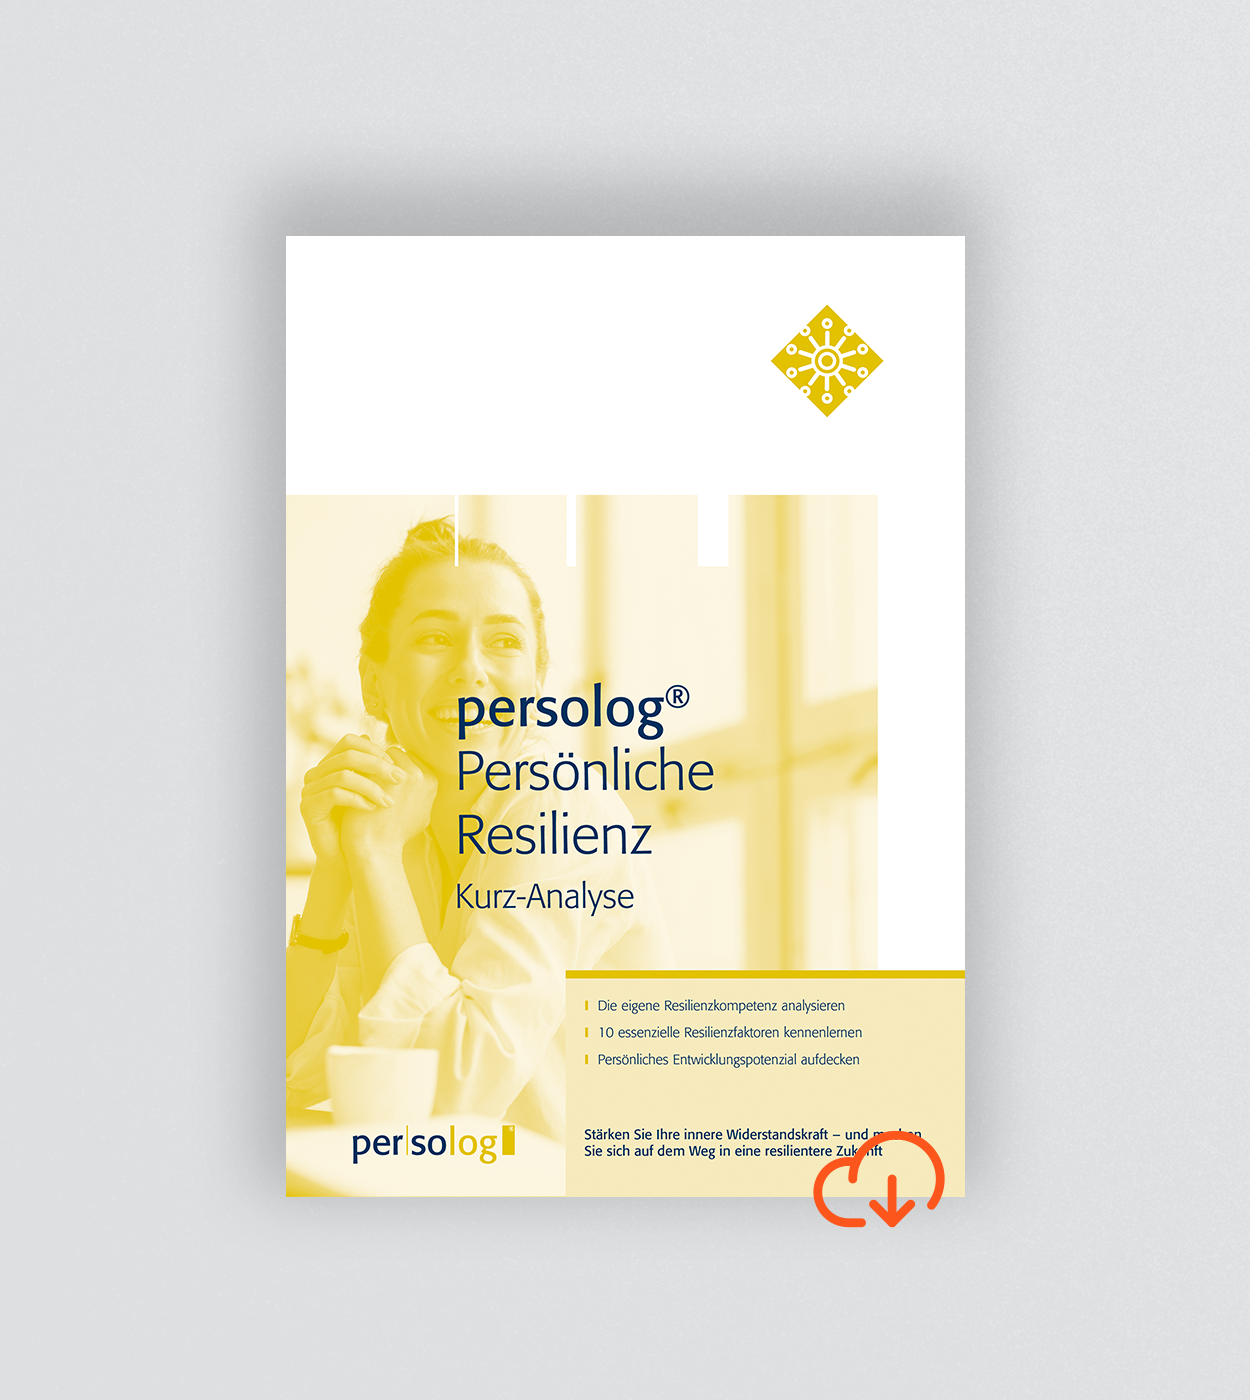 persolog® Personal Resilience Short Profile Online